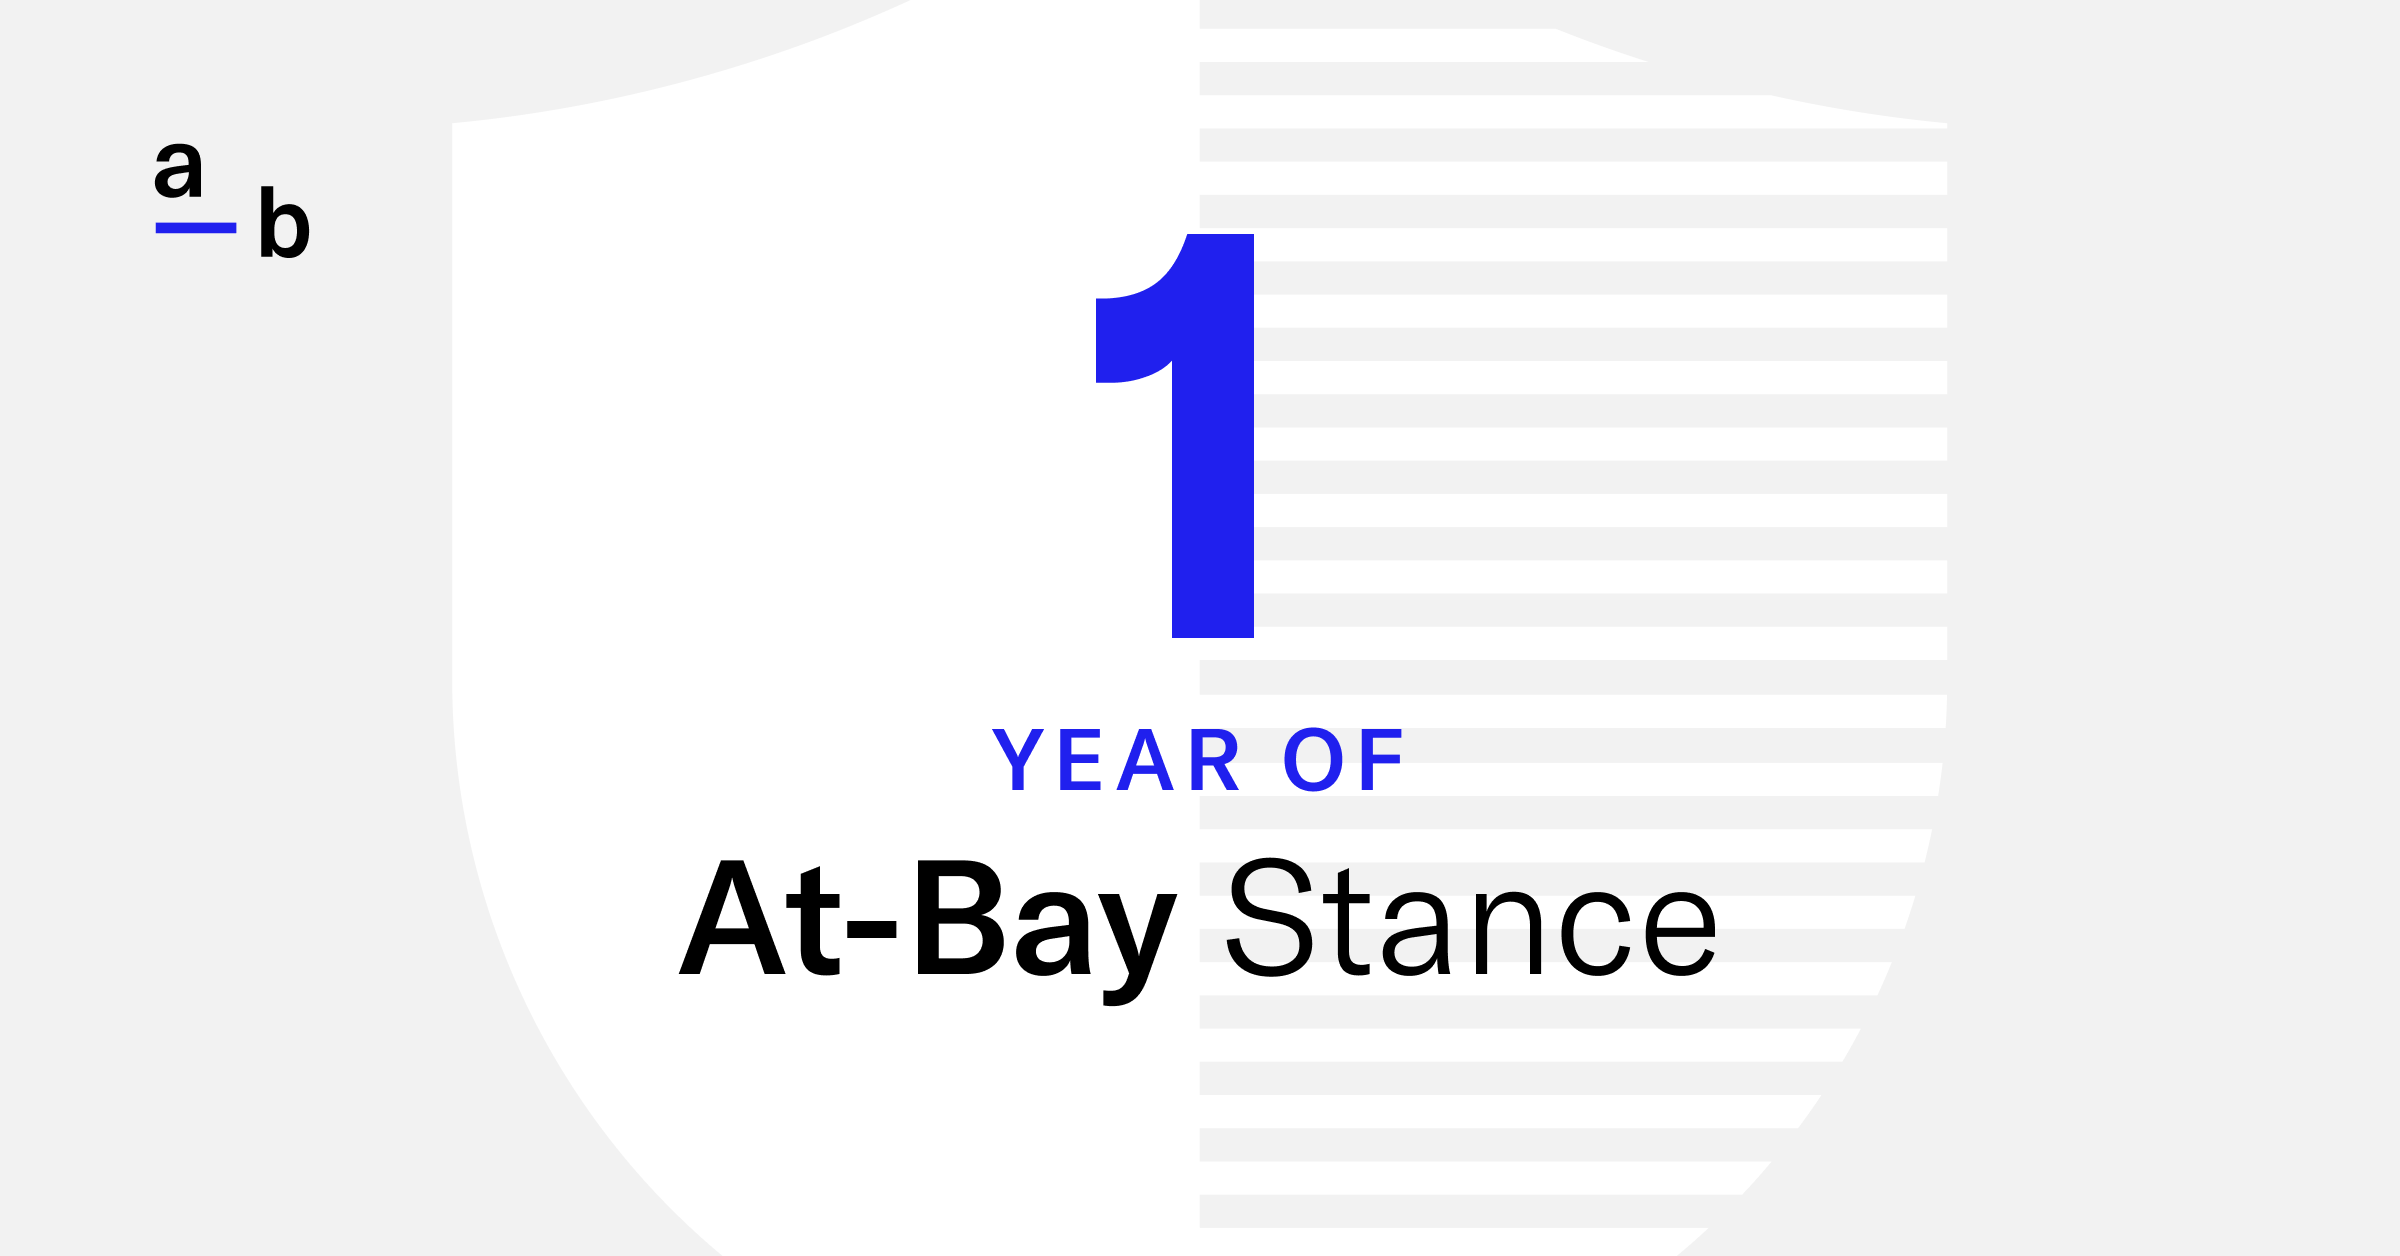 At-Bay Stance Turns One